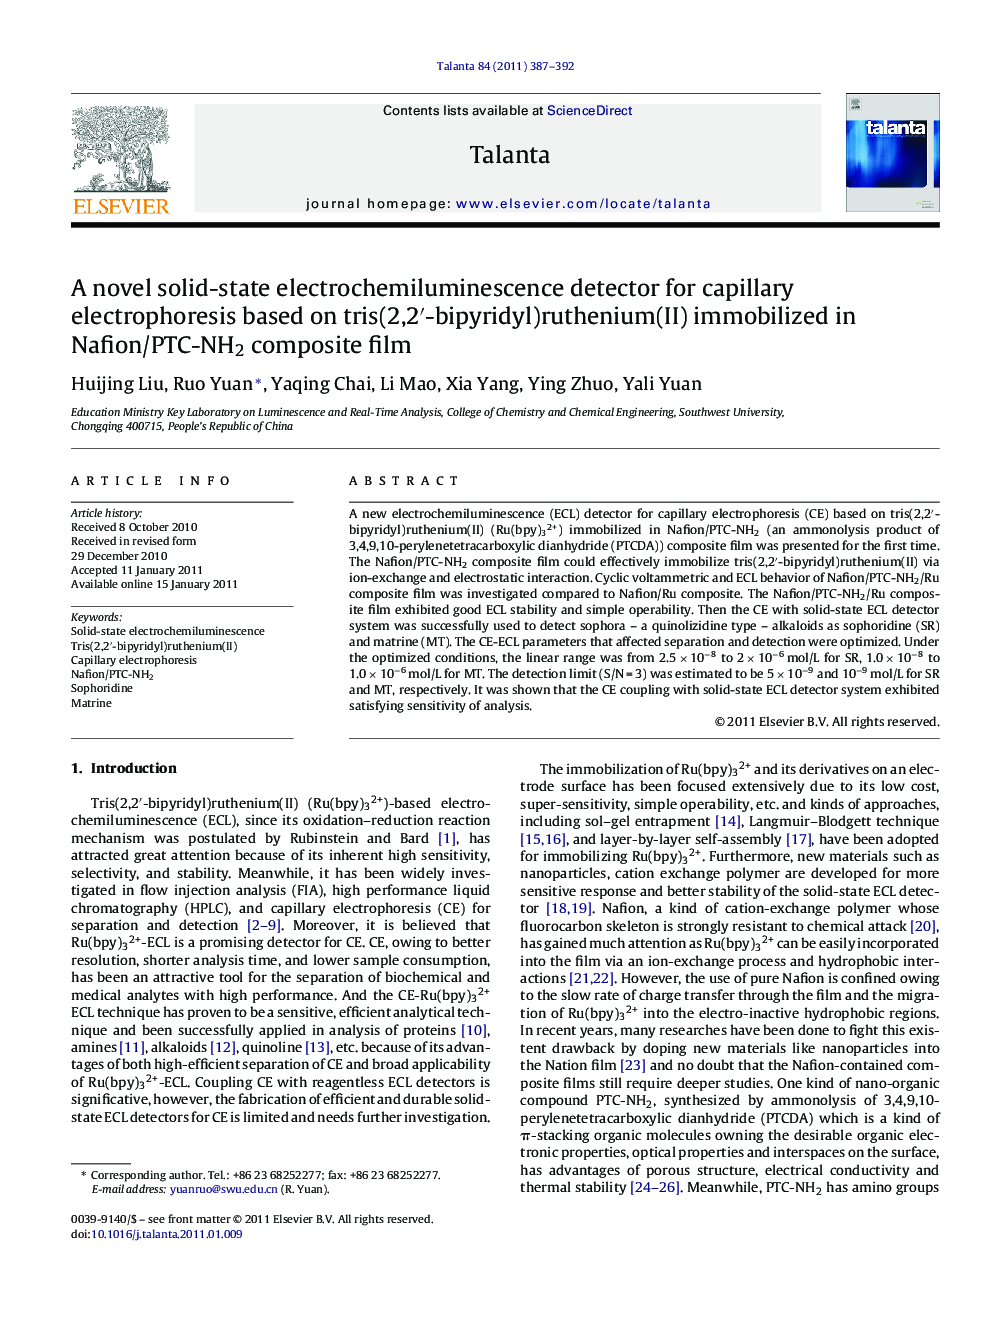 A novel solid-state electrochemiluminescence detector for capillary electrophoresis based on tris(2,2â²-bipyridyl)ruthenium(II) immobilized in Nafion/PTC-NH2 composite film